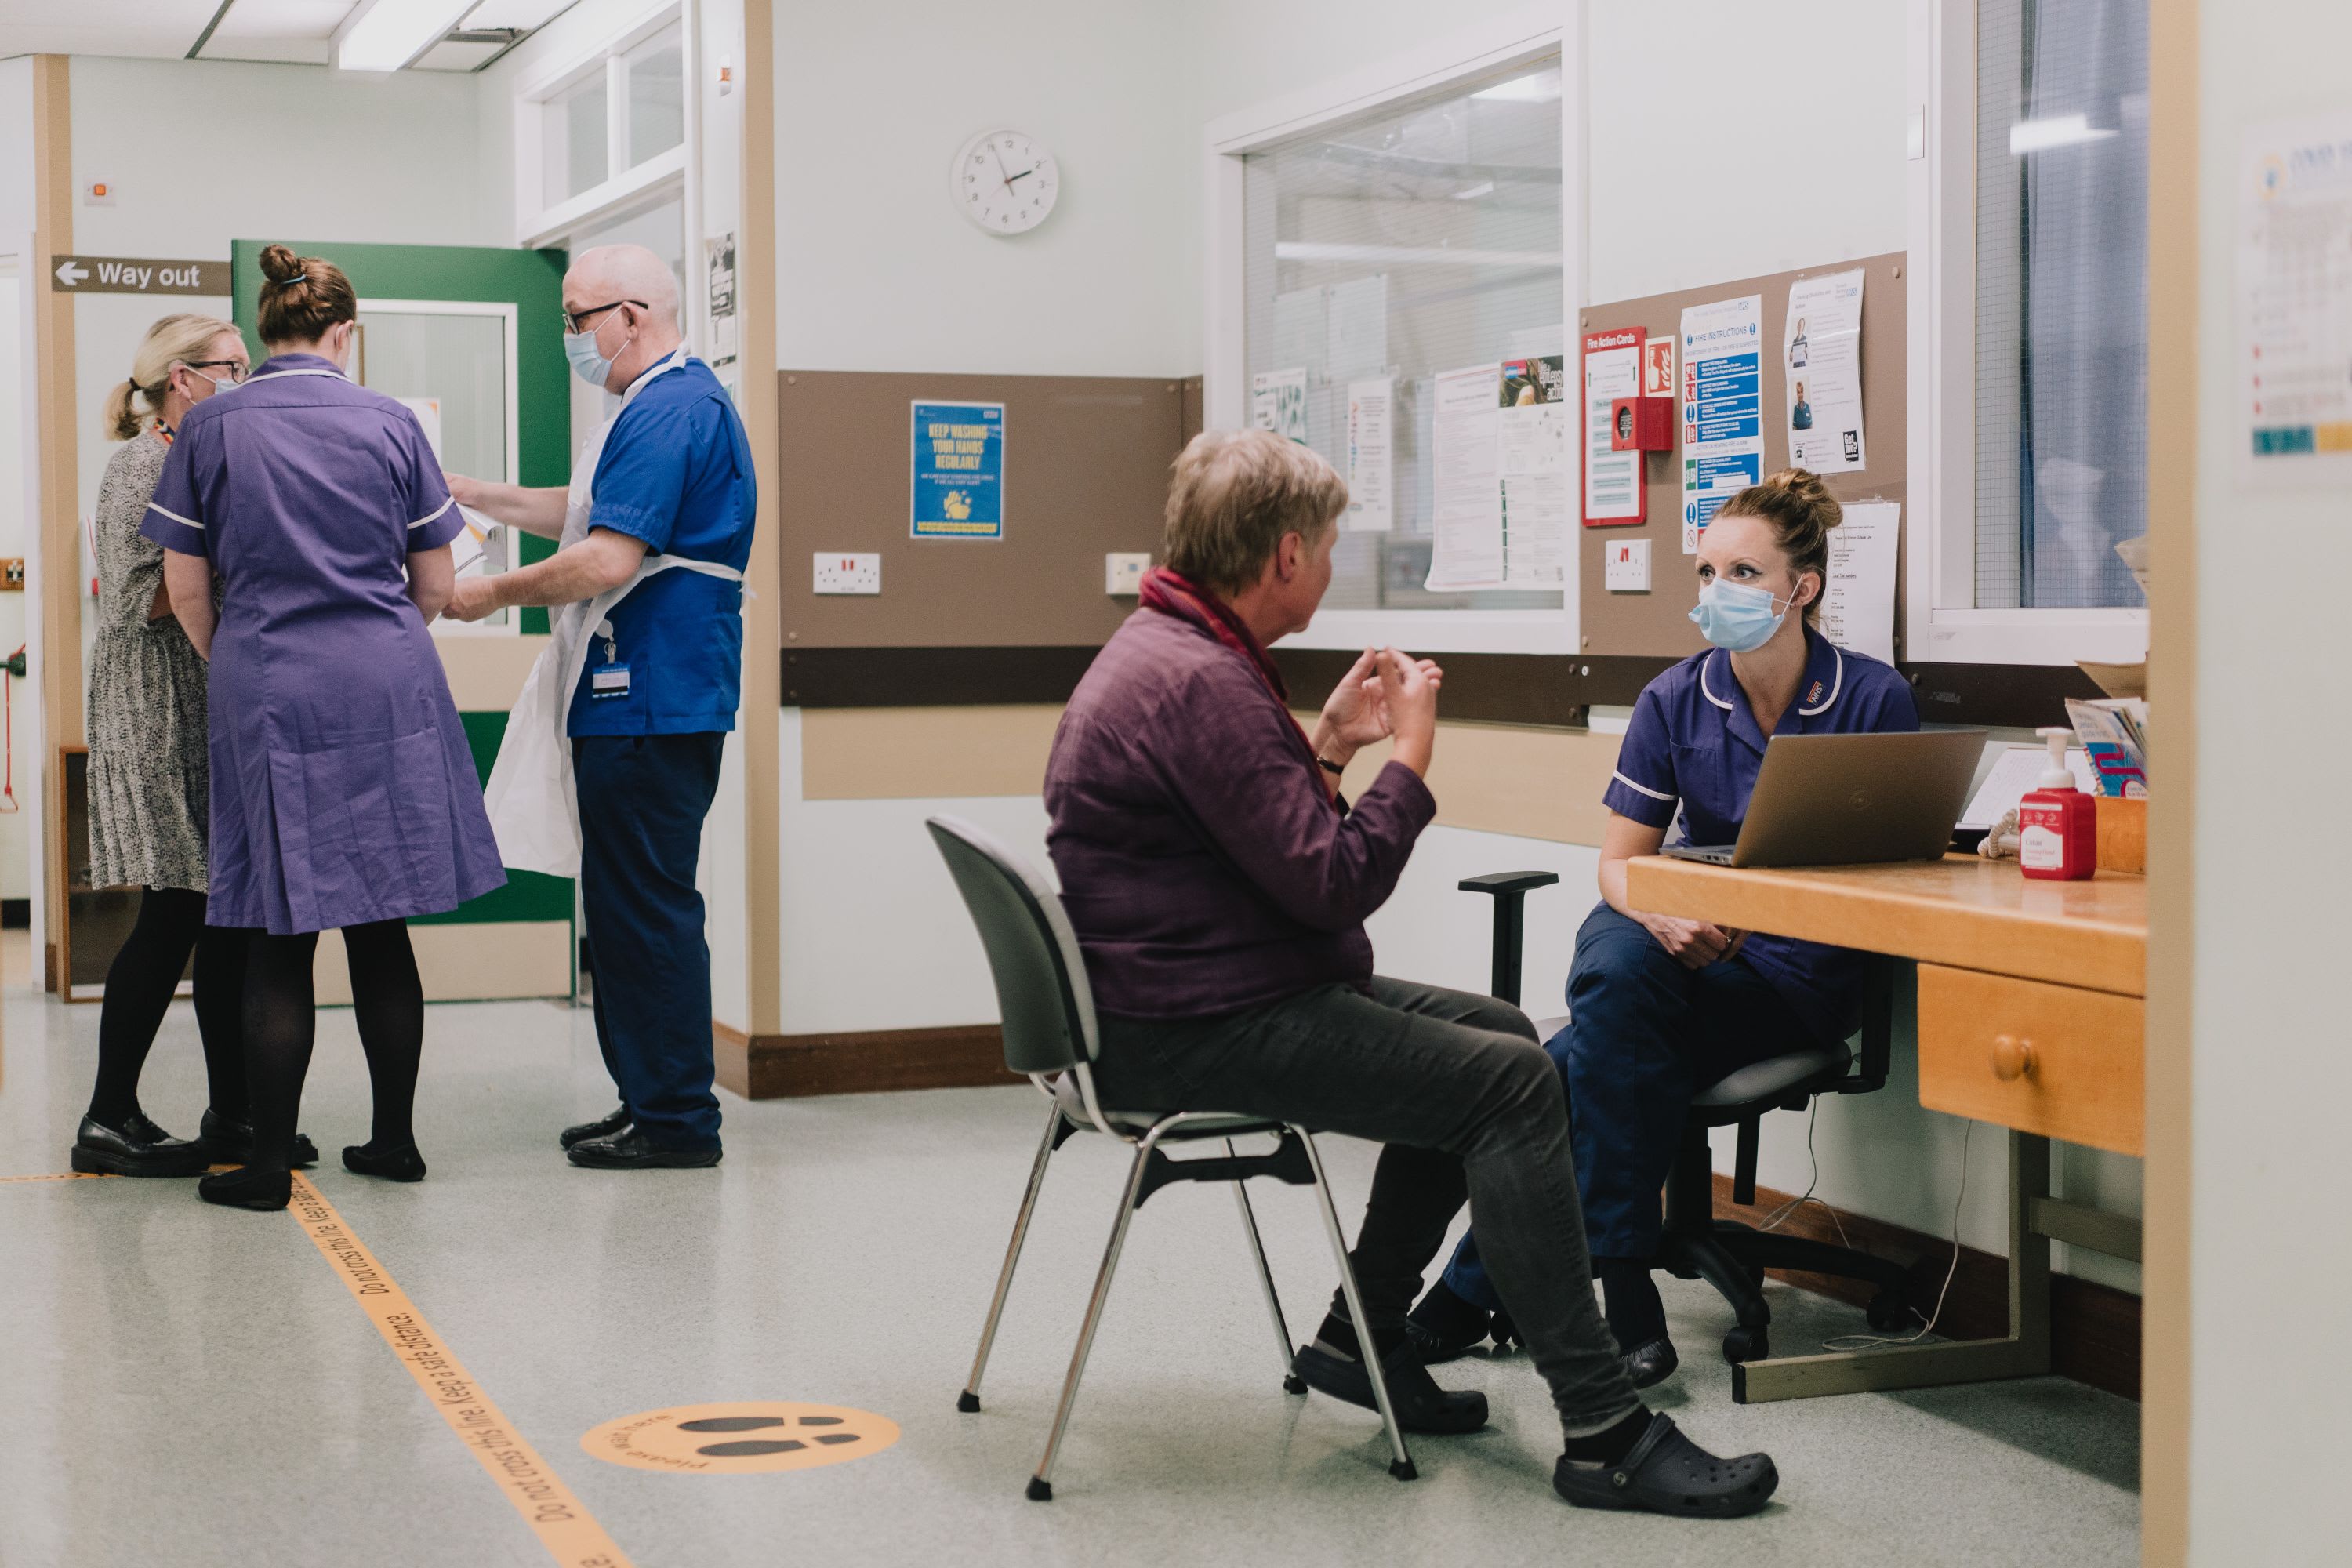 A group of MND staff talk in a small corridor next to an MND patient and clinical nurse sat talking together